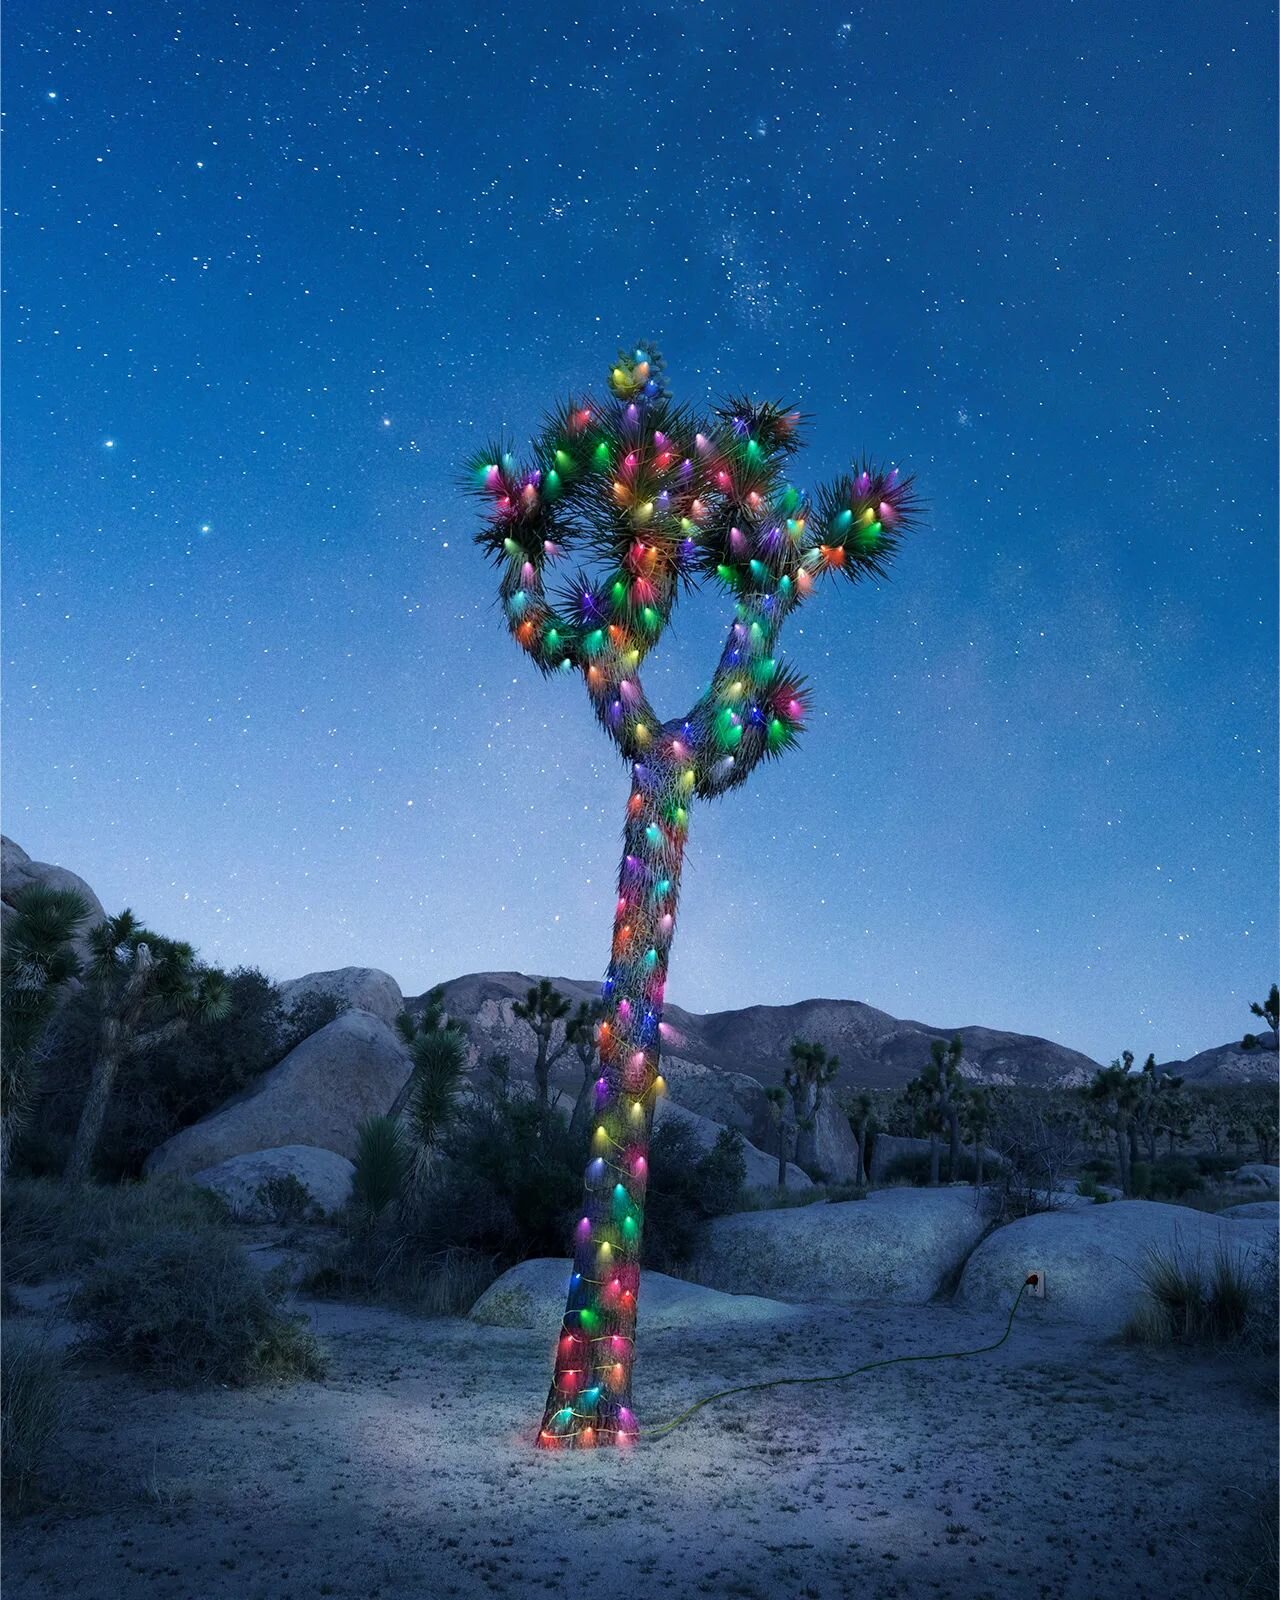 Merry Christmas and happy holidays from the desert! 🌵🎄 I hope you have a fun and safe time.

P.S. I would never put Christmas lights on a #joshuatree. This is only a composite that I created using @Photoshop. #MadeWithPhotoshop

If you zoom in clos